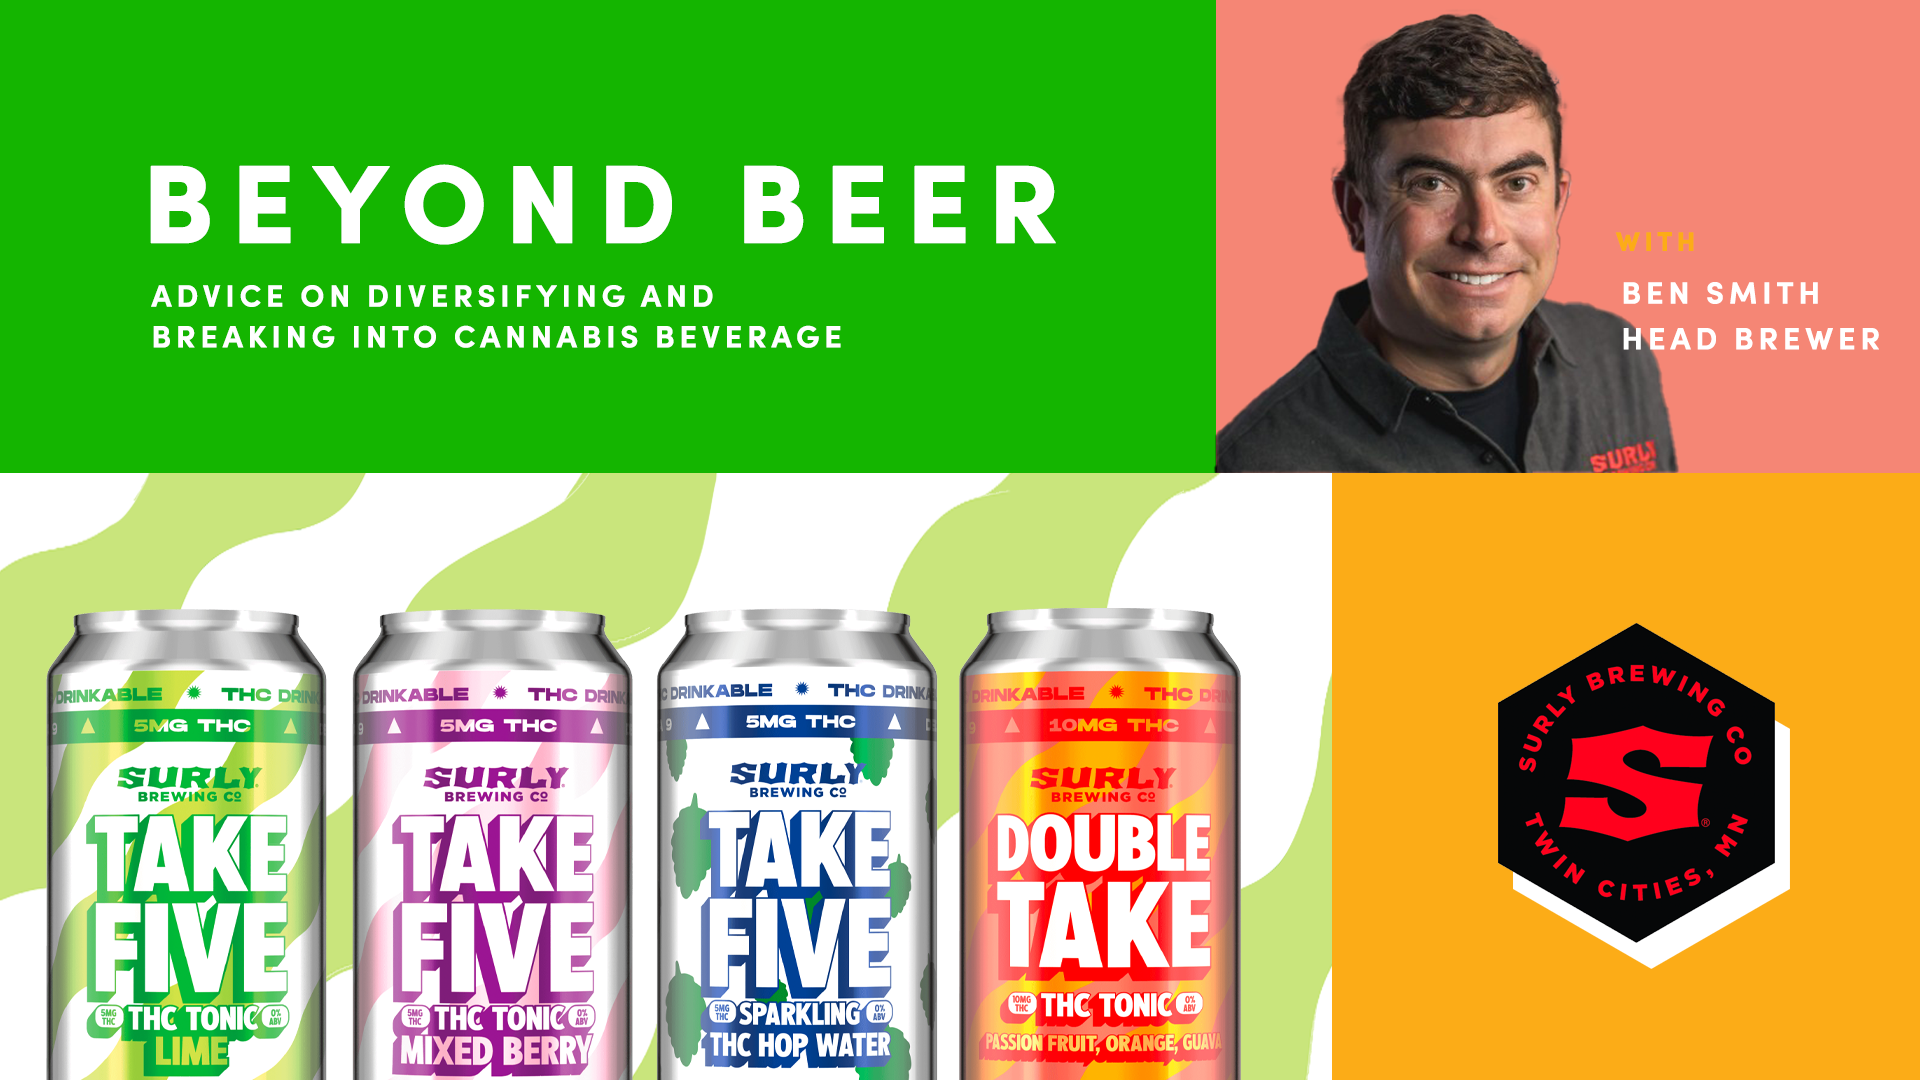 Beyond Beer: advice on diversifying and breaking into cannabis beverage